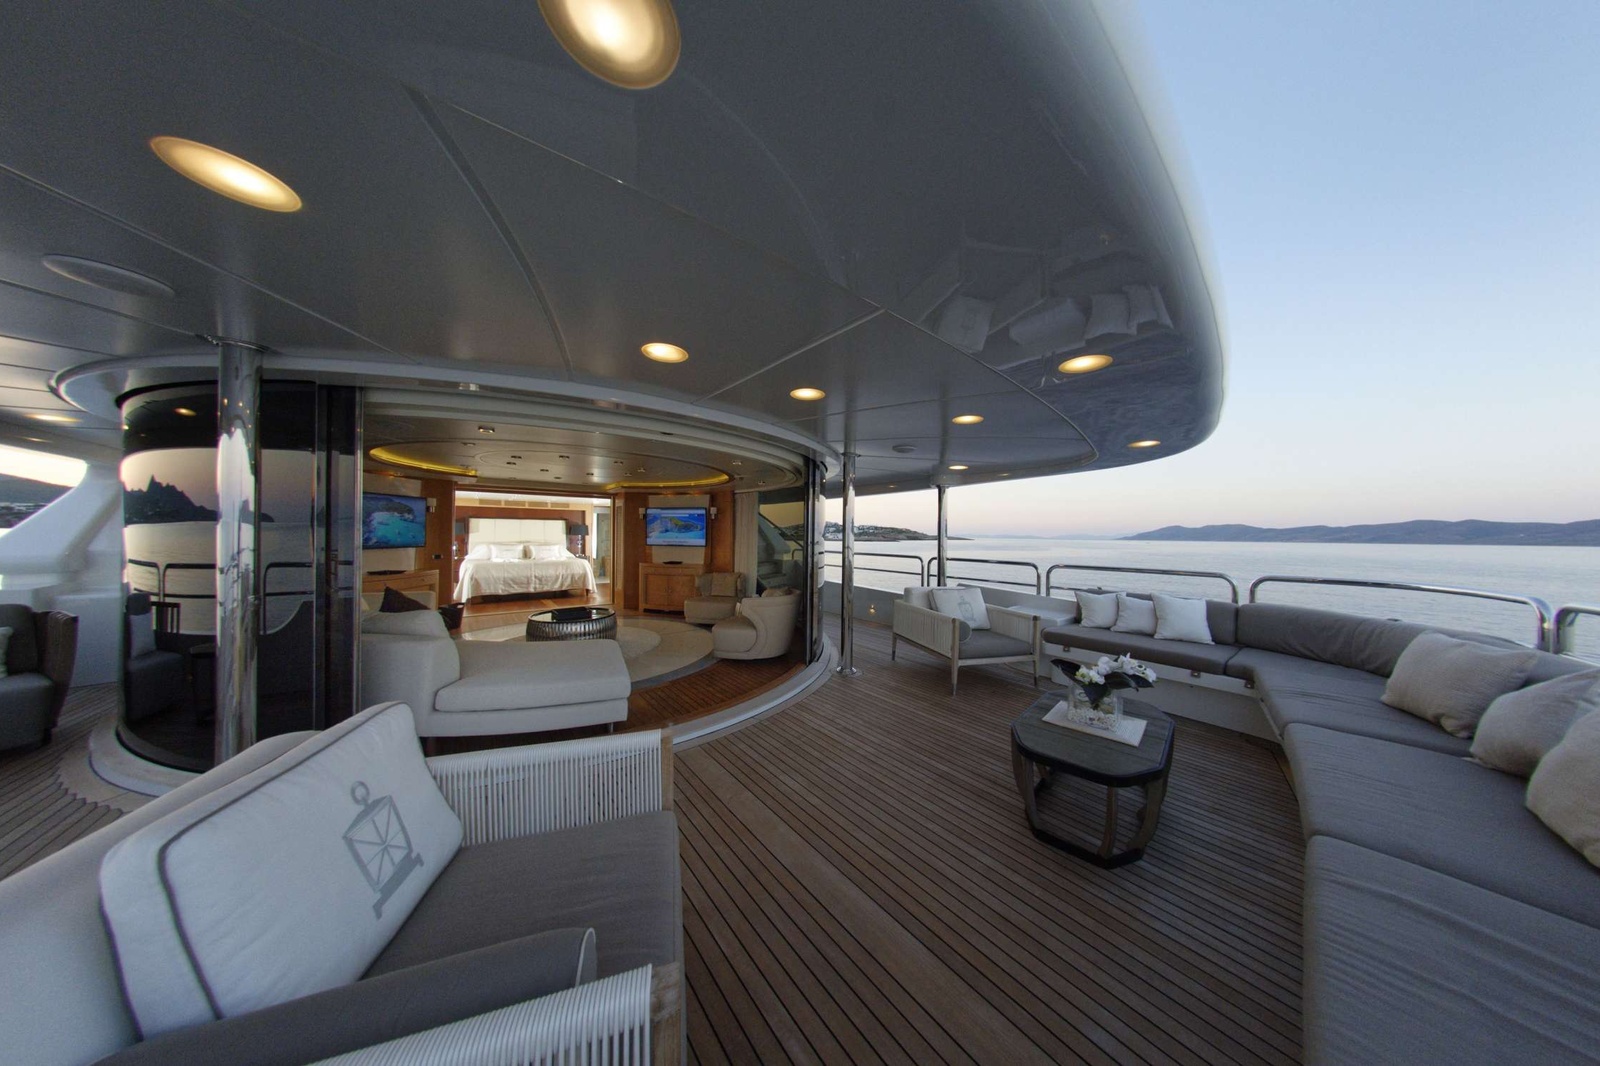 Bridge Deck with SKYLOUNGE & 2nd Master Cabin which can be totally separated by the Skylounge